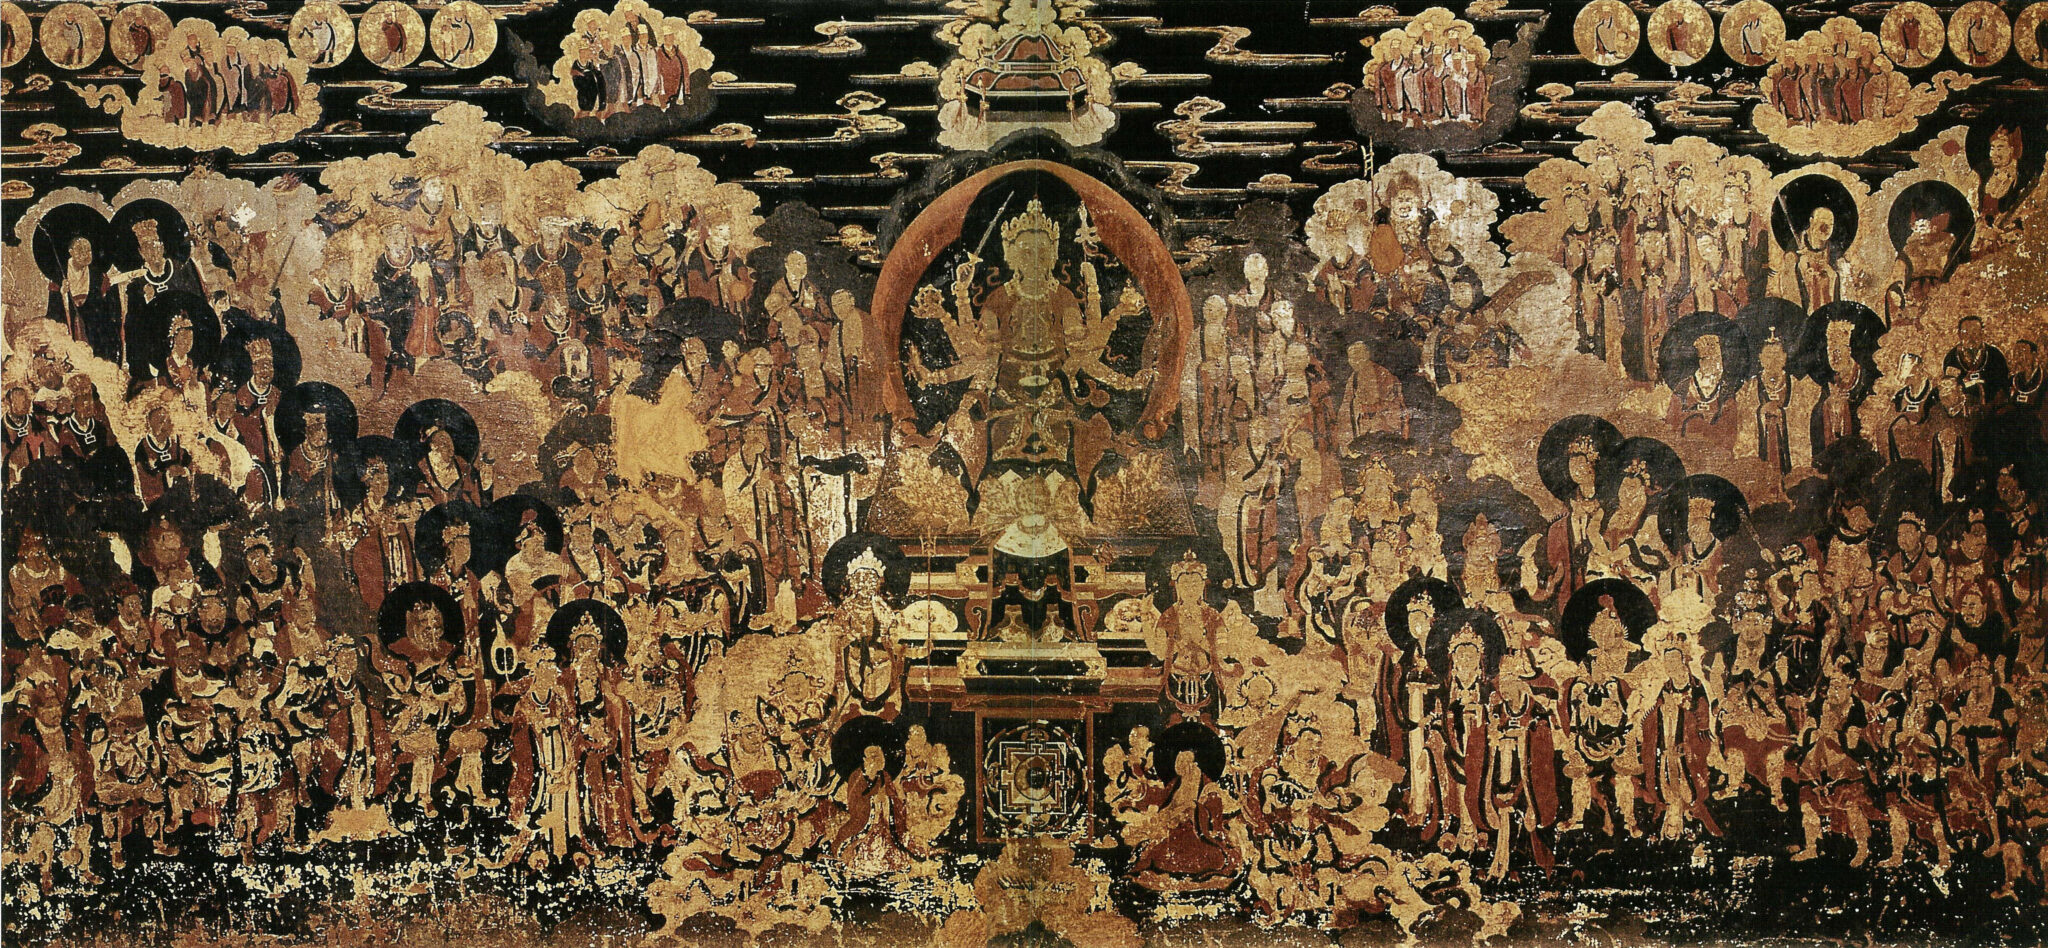 Large group scene depicting Bodhisattva under black sky surrounded on all sides by scores of attendants